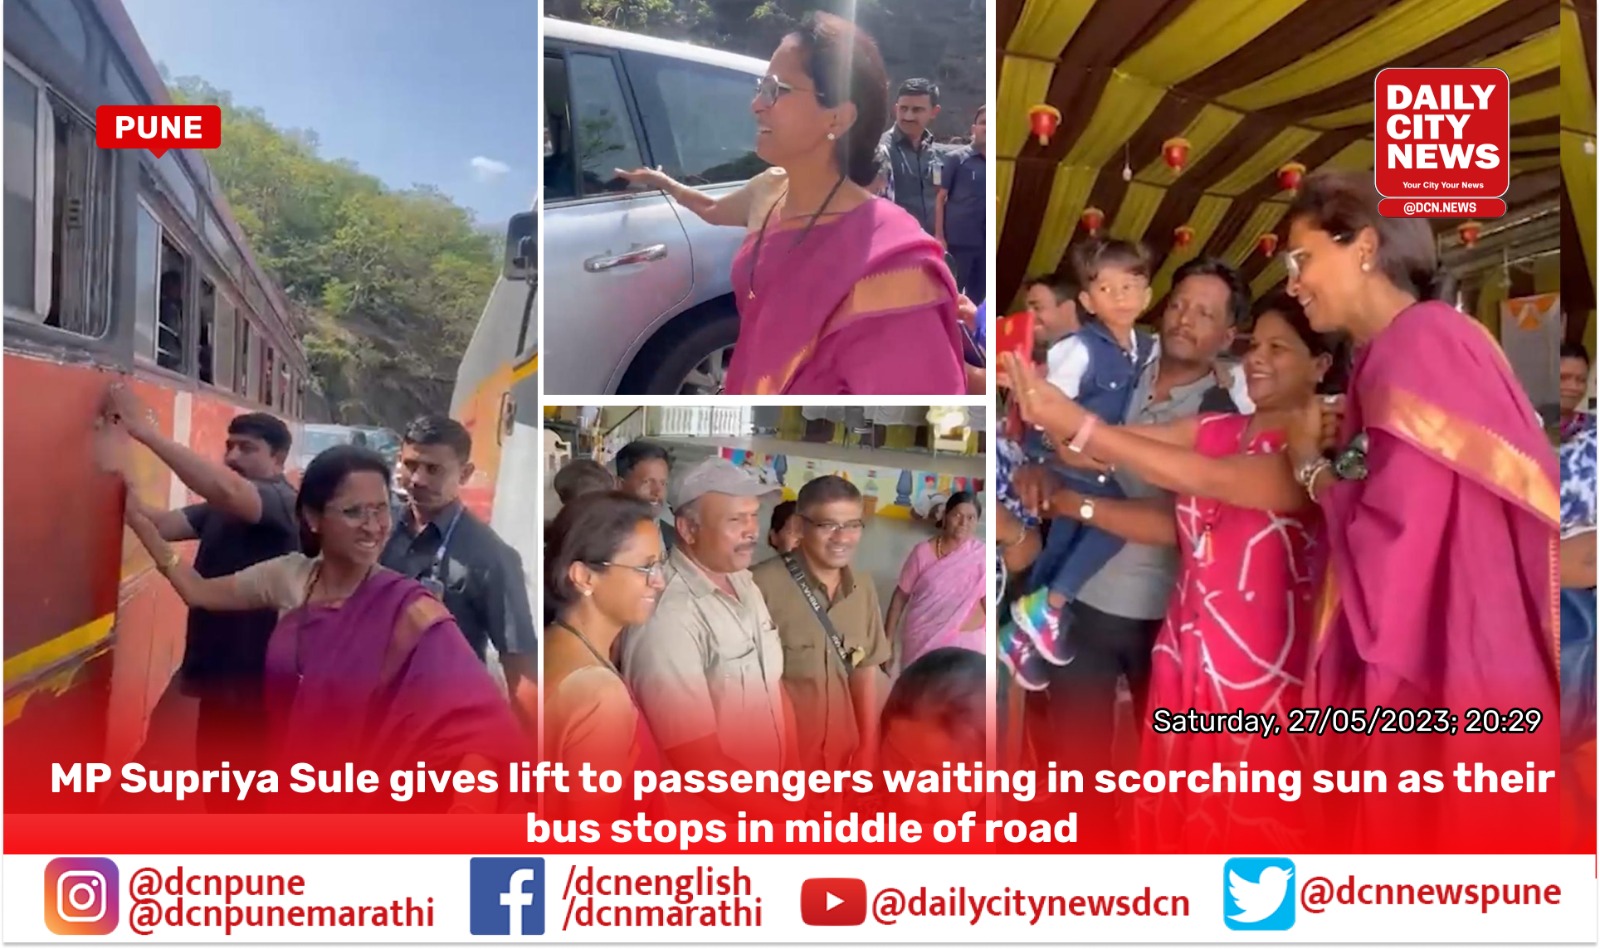 MP Supriya Sule gives lift to passengers waiting in scorching sun as their bus stops in middle of road